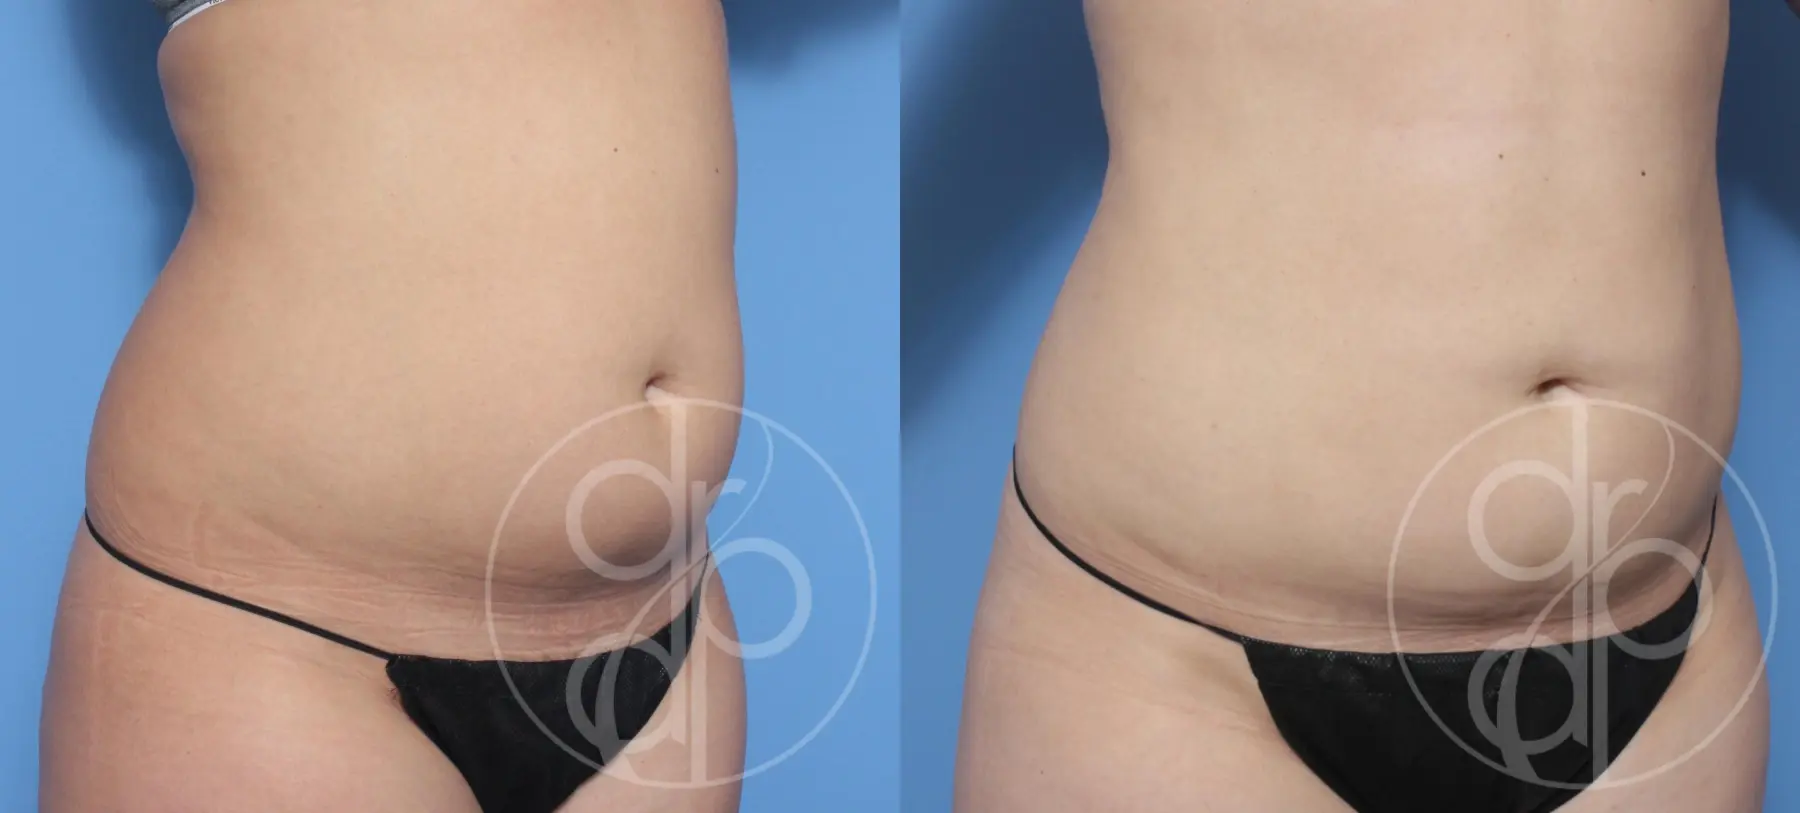 patient 12394 liposuction before and after result - Before and After 3